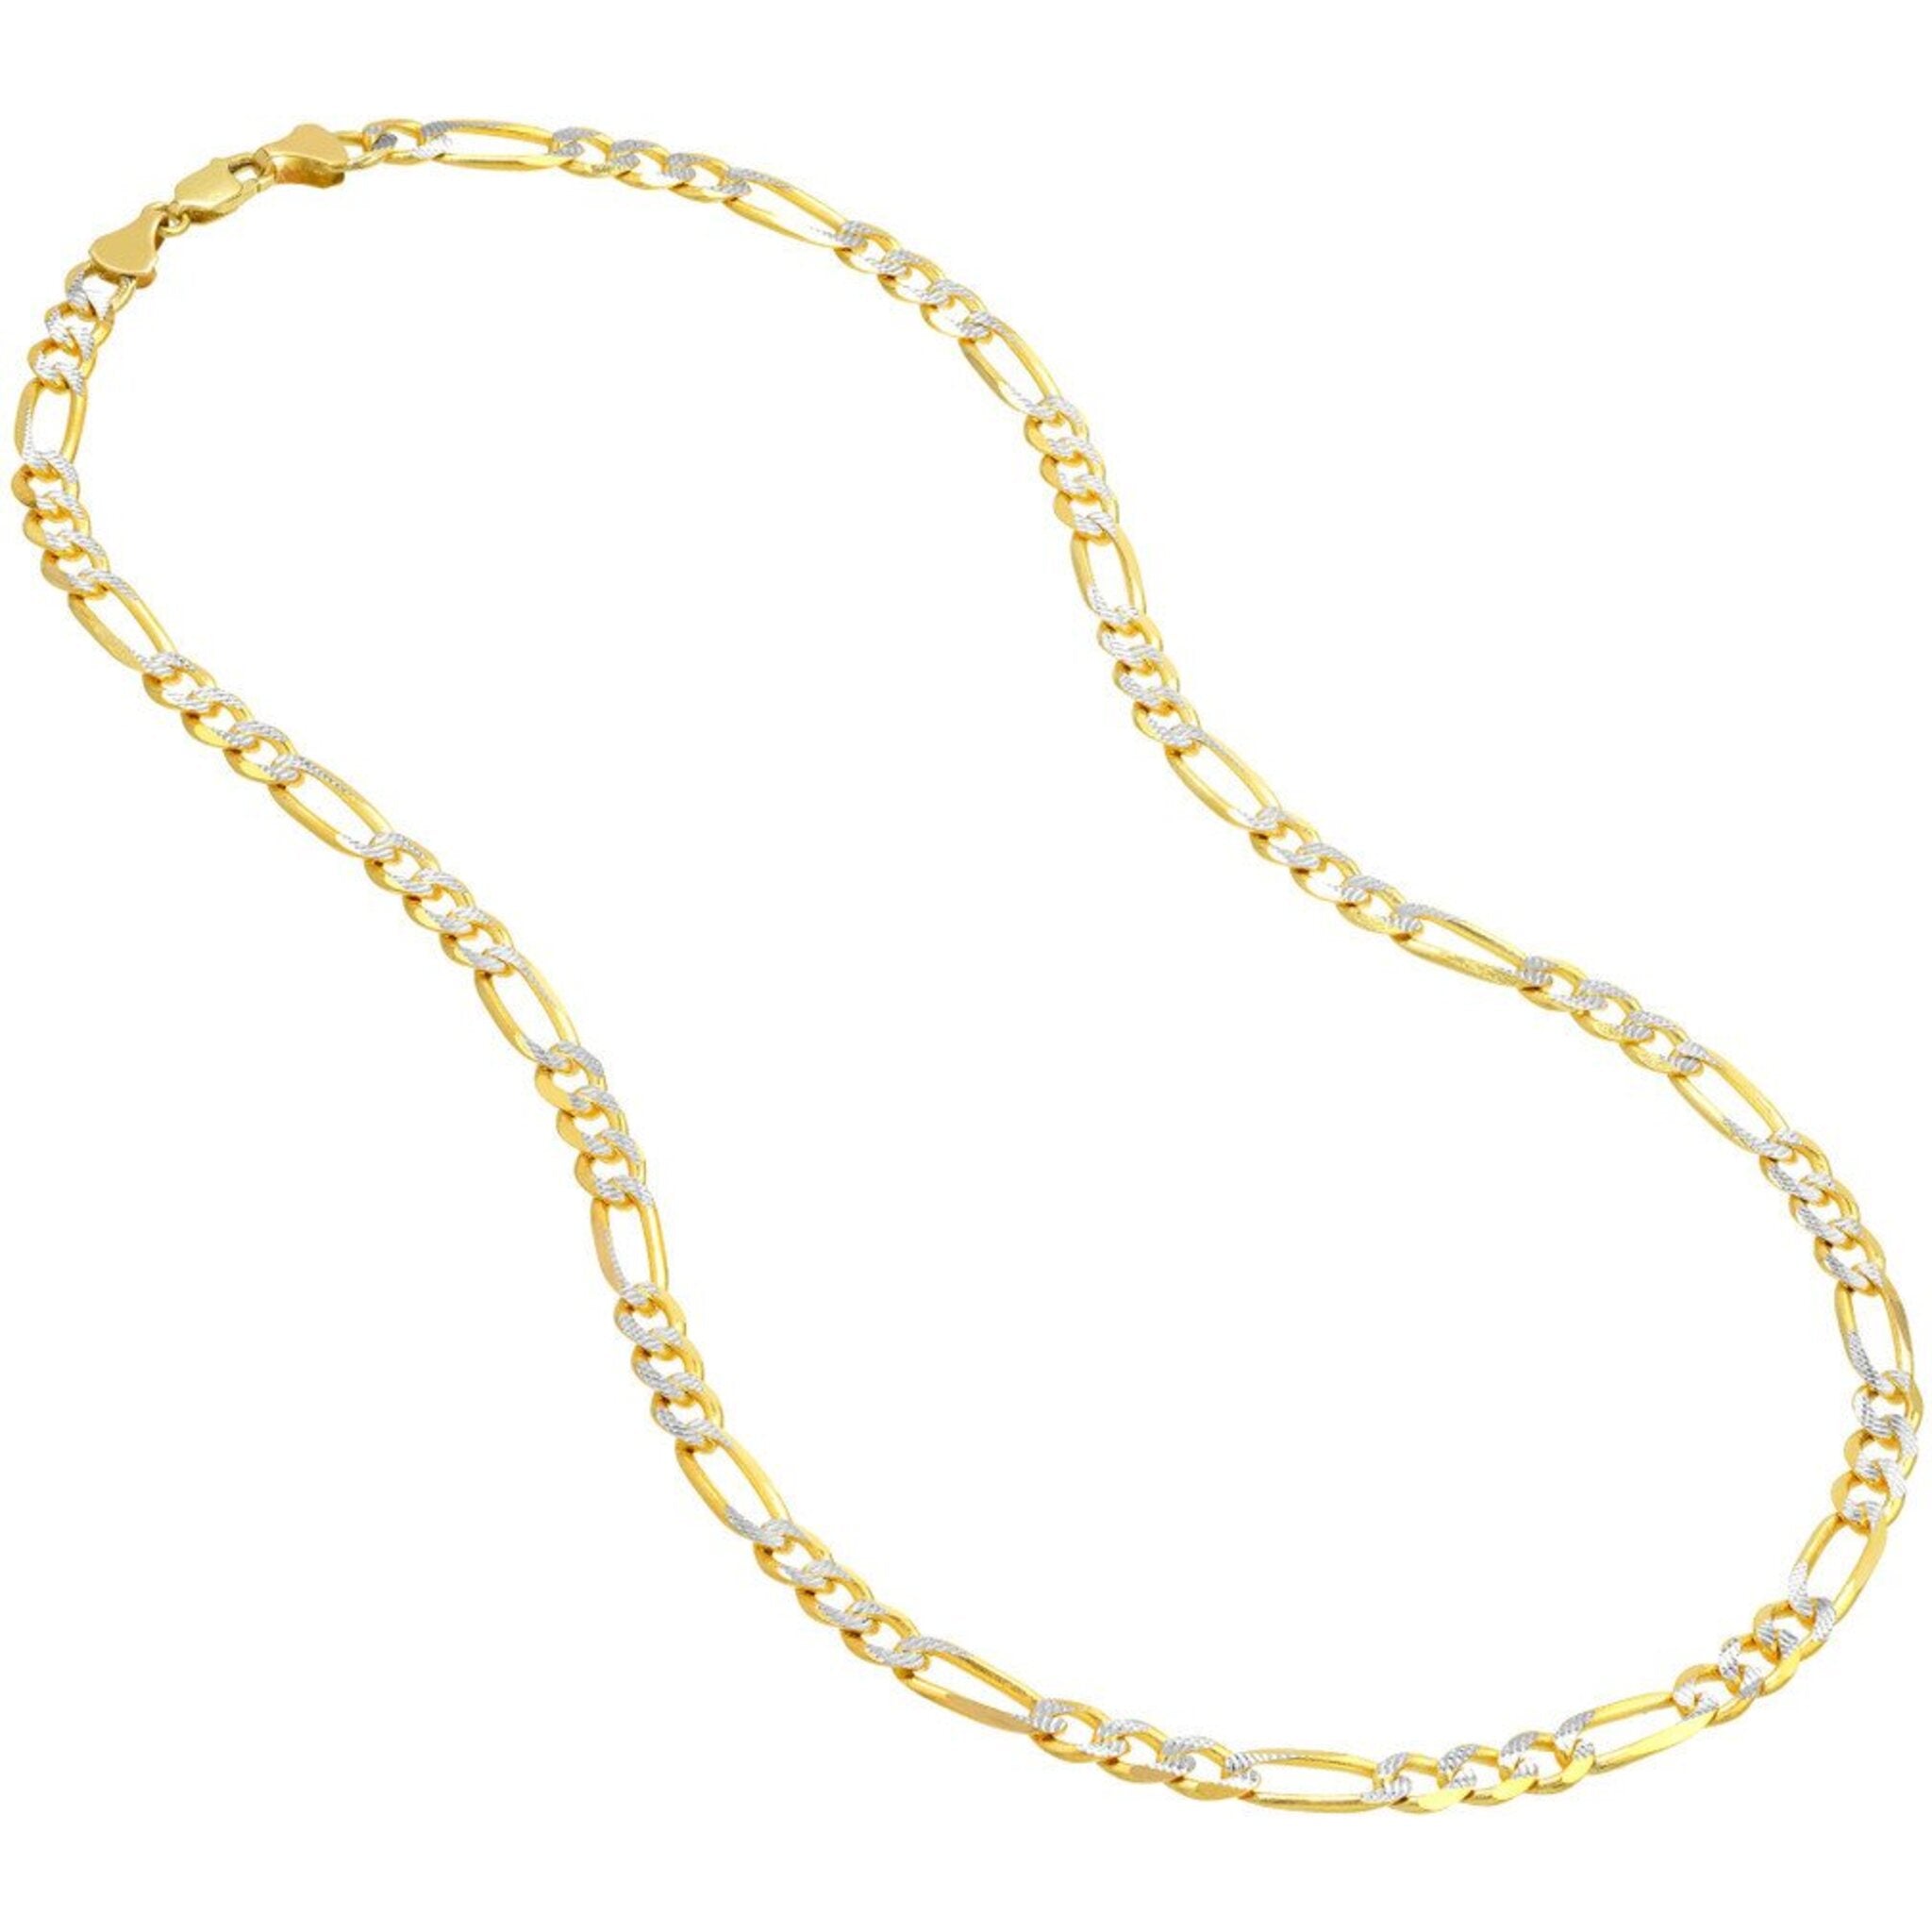 Lā'au Wood Fish Hook w/8mm Link 24 Stainless Steel Chain Figaro Link 8mm 24 inch Chain w/Fishhook / Gold Plated